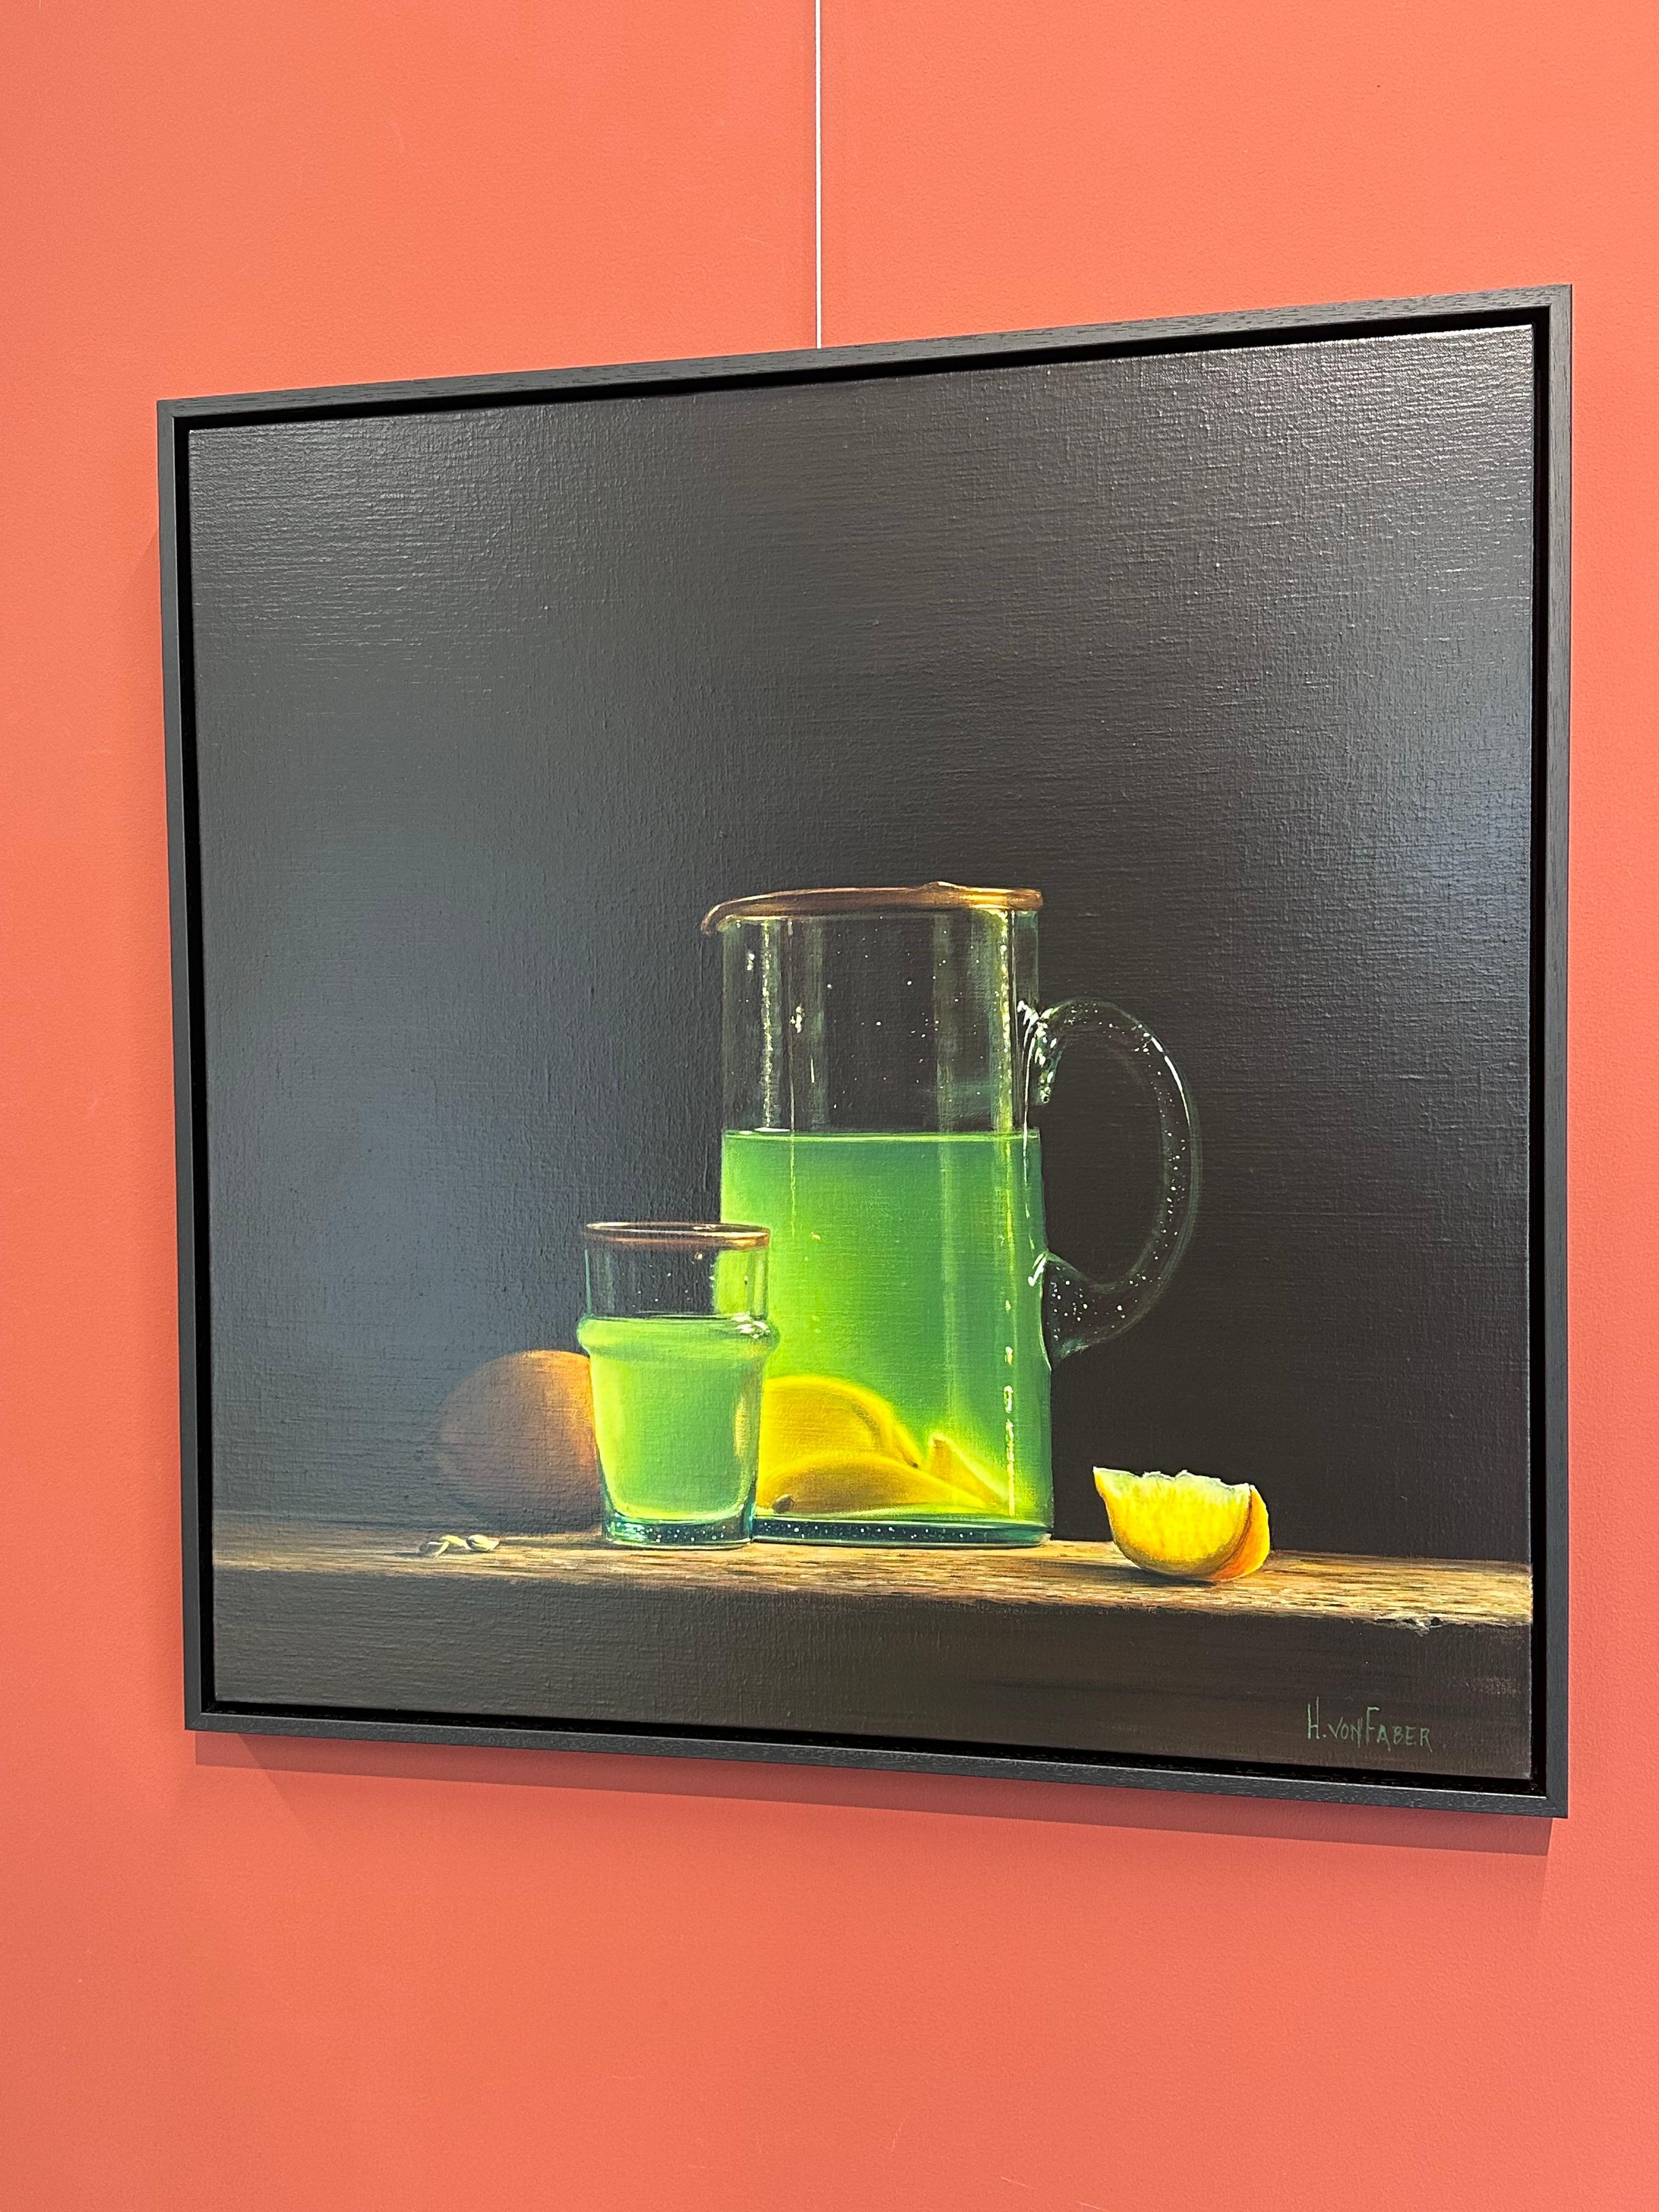 Heidi von Faber
Lemon Limonade
Acrylic on linen
70 x 70 cm ( framed/ included in price 75 x 75 cm)

Dutch artist Heidi Von Faber lives and works in The Hague. 

The Stillllifes she paints are modern but made according the tradition of the old